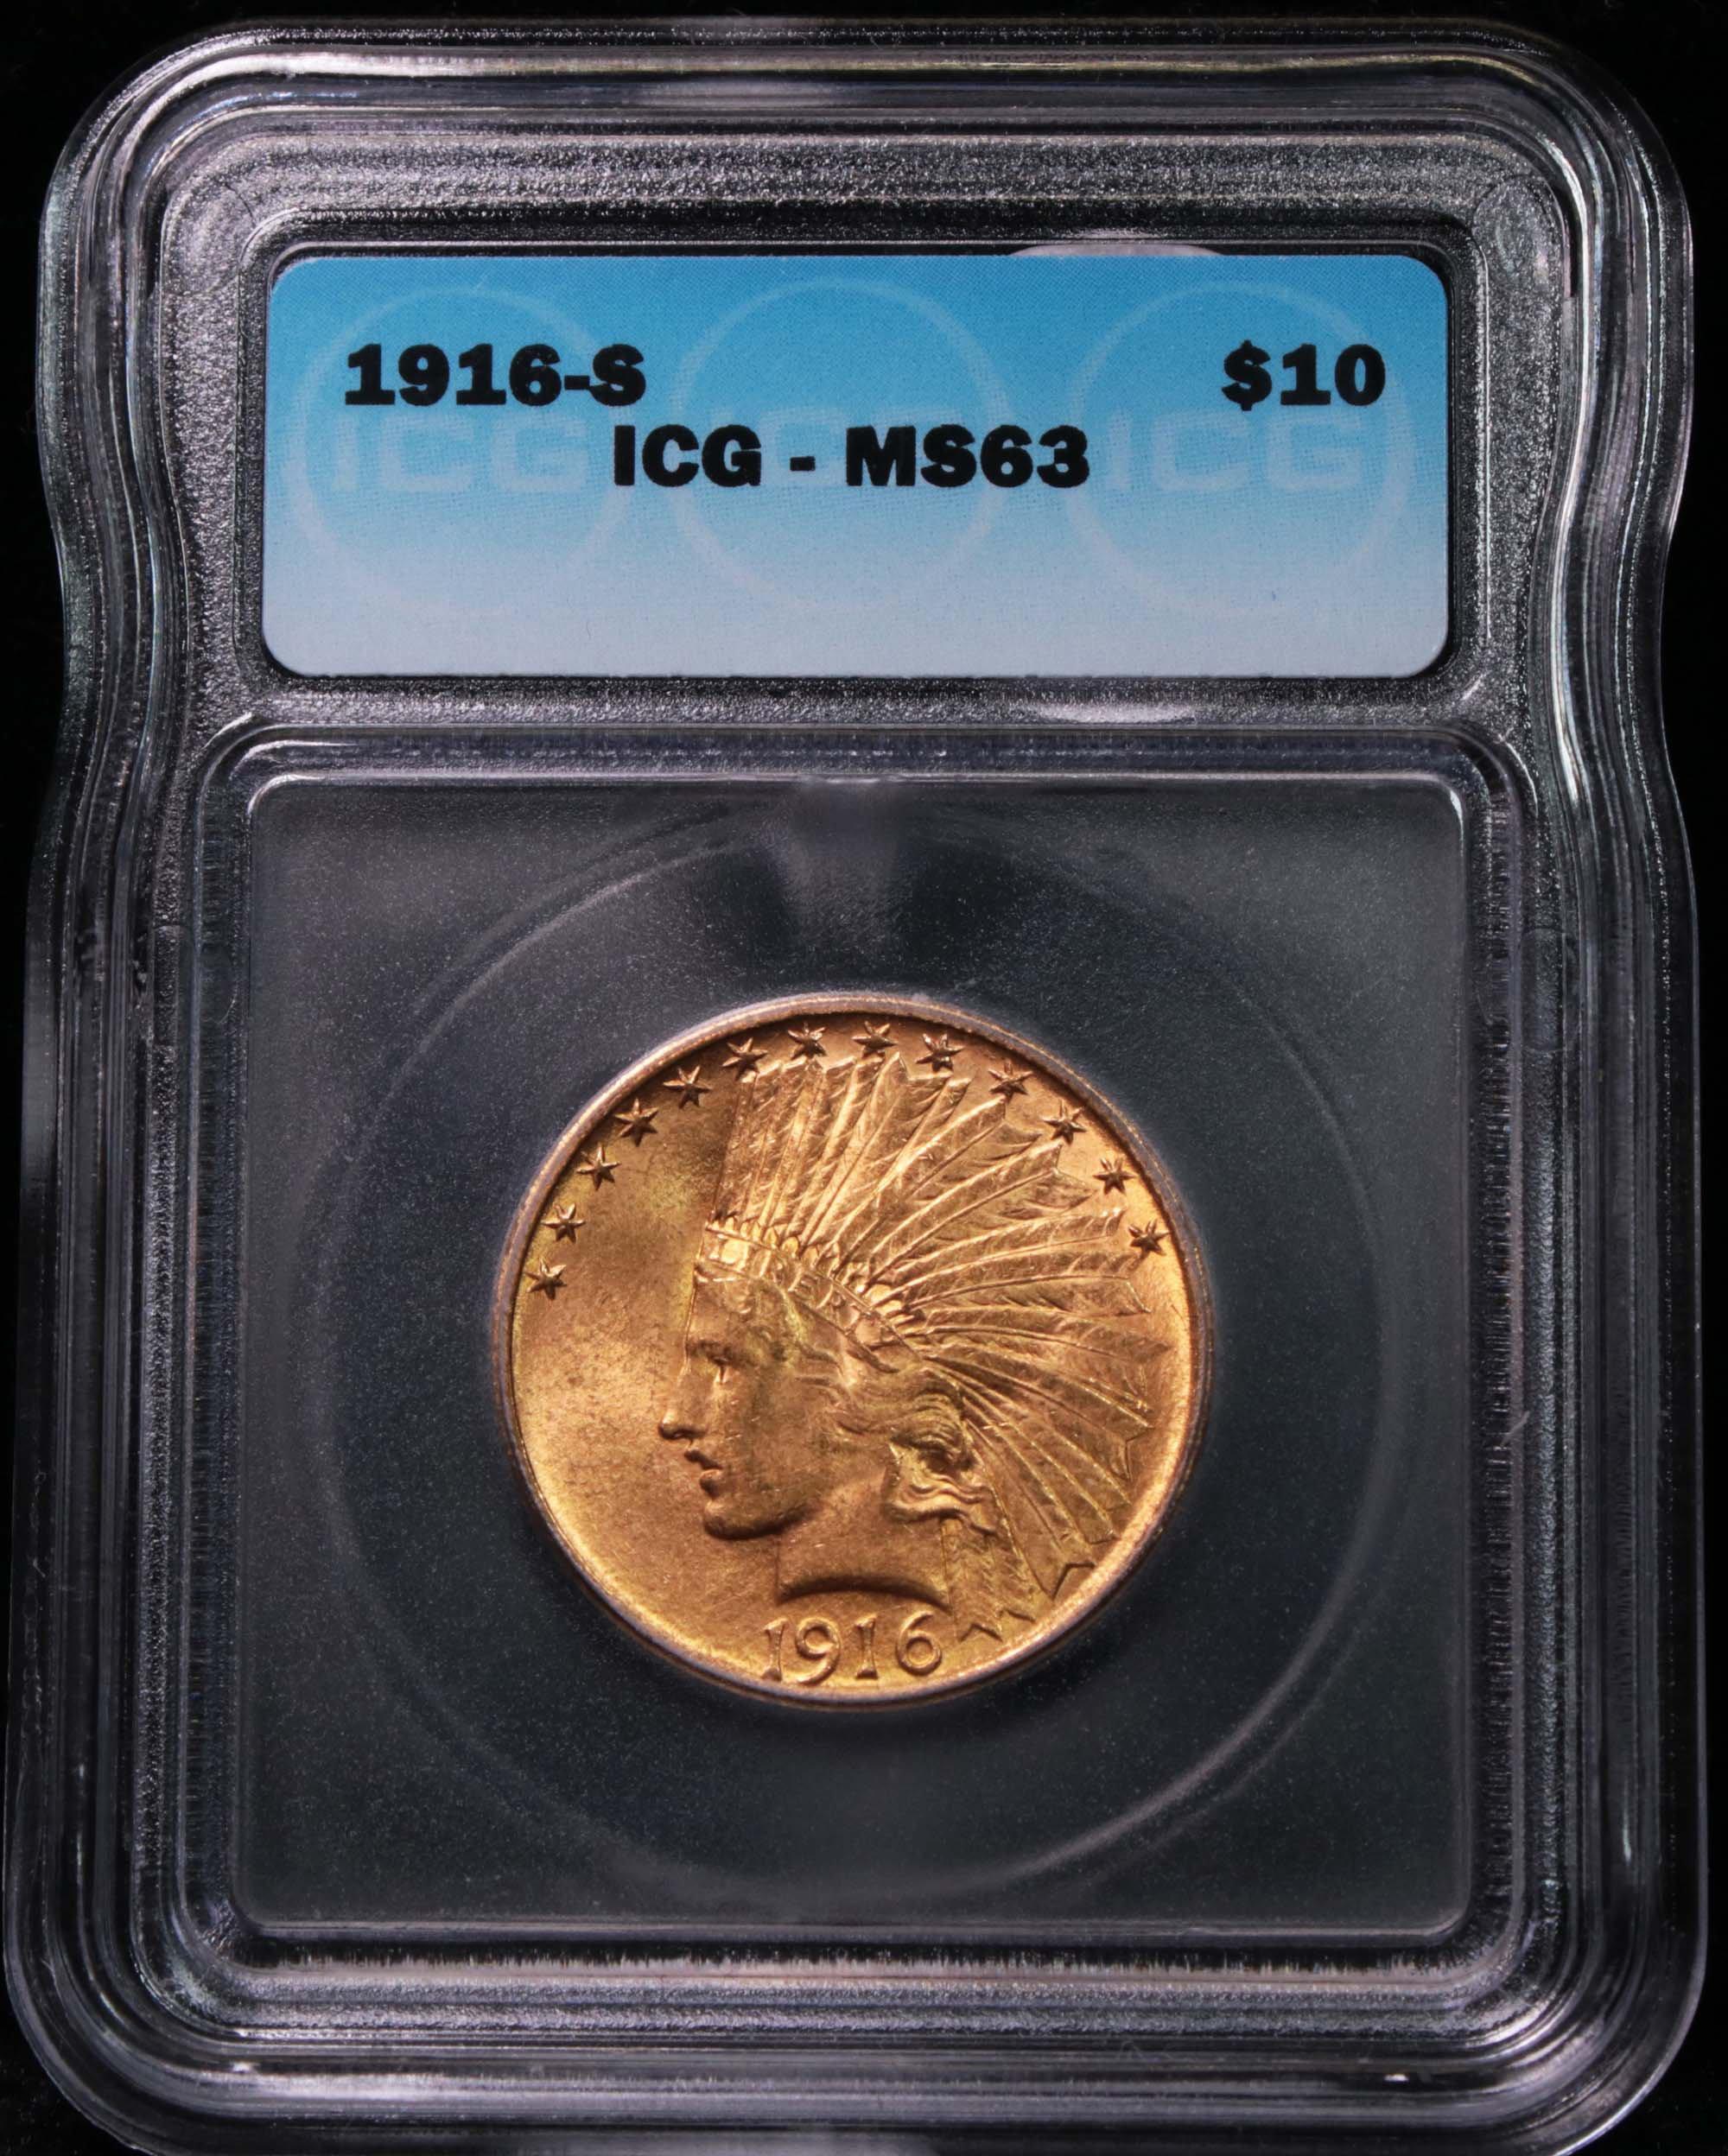 ***Auction Highlight*** 1916-s Indian Head Gold $10 Graded ms63 by ICG (fc)